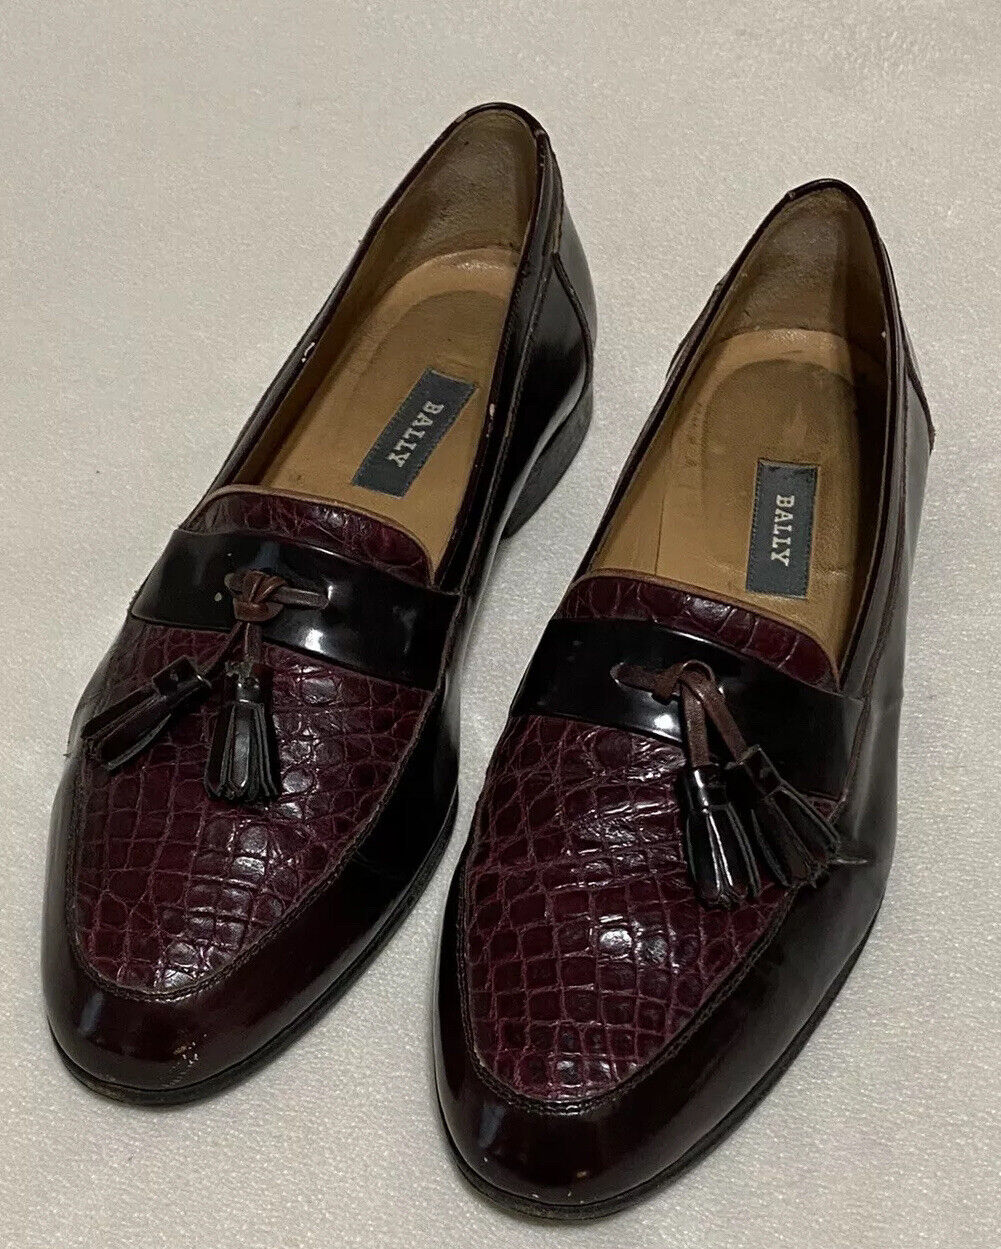 Bally Men\'s Tassel Loafers Dress Shoes Size 9 EEE Leather Croc Print Burgundy